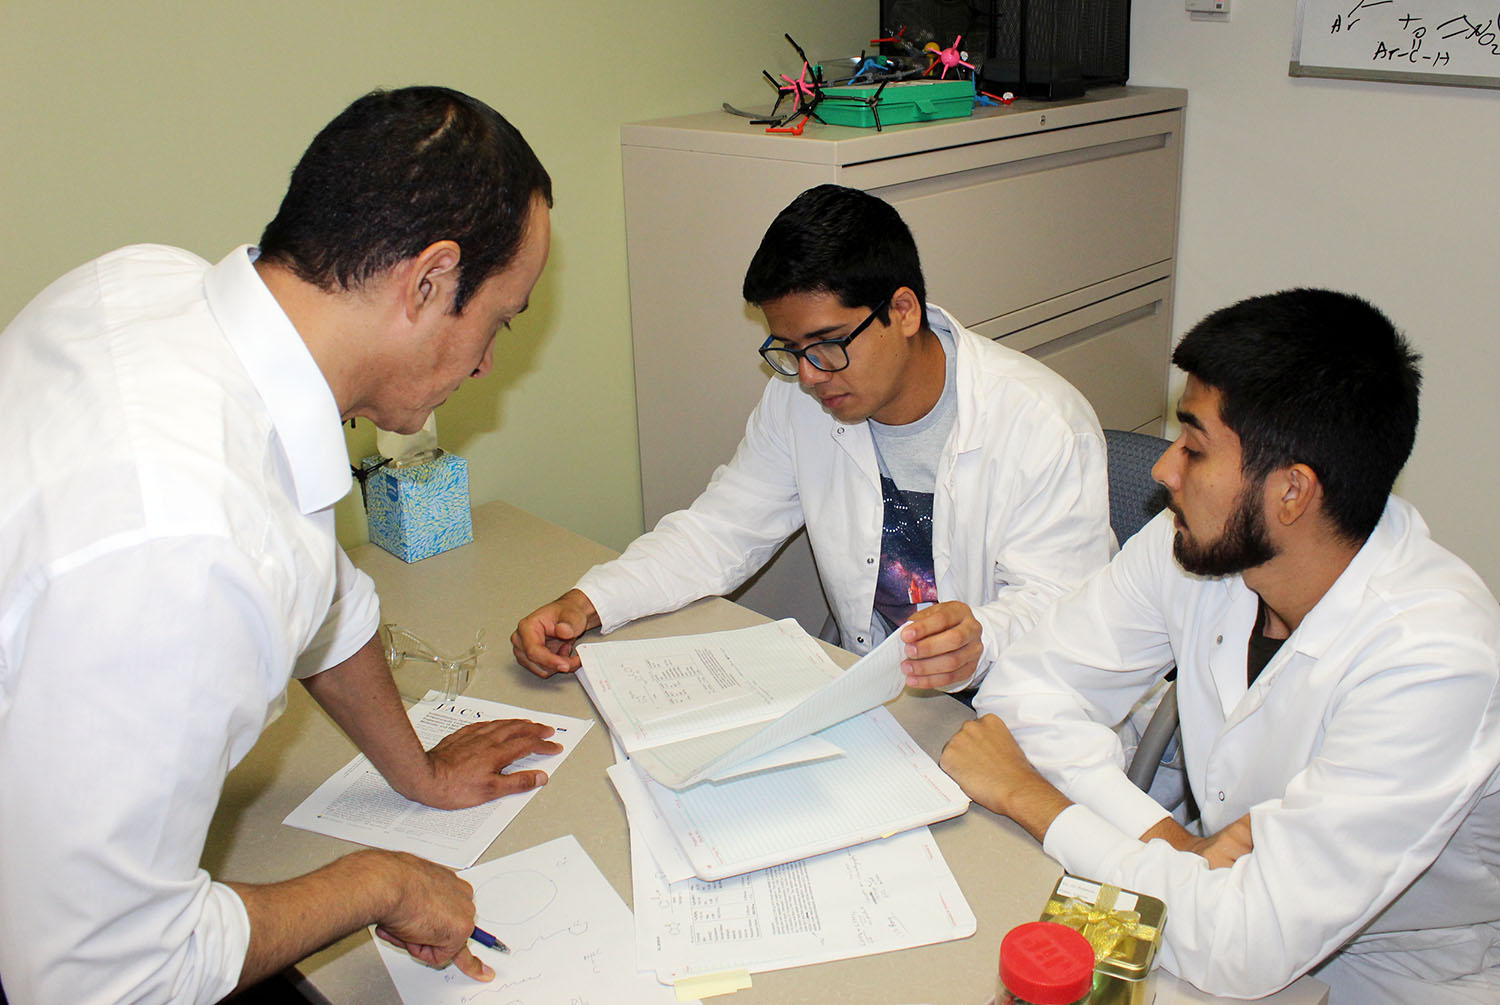 UNK chemistry professor Hector Palencia, left, hosted two students from Mexico in summer 2019 through the DELFIN research program. Emerson Francisco Arias from the Autonomous University of Nayarit, right, and Omar Lozano Ramos from the University of Colima spent seven weeks at UNK while assisting Palencia with his research.